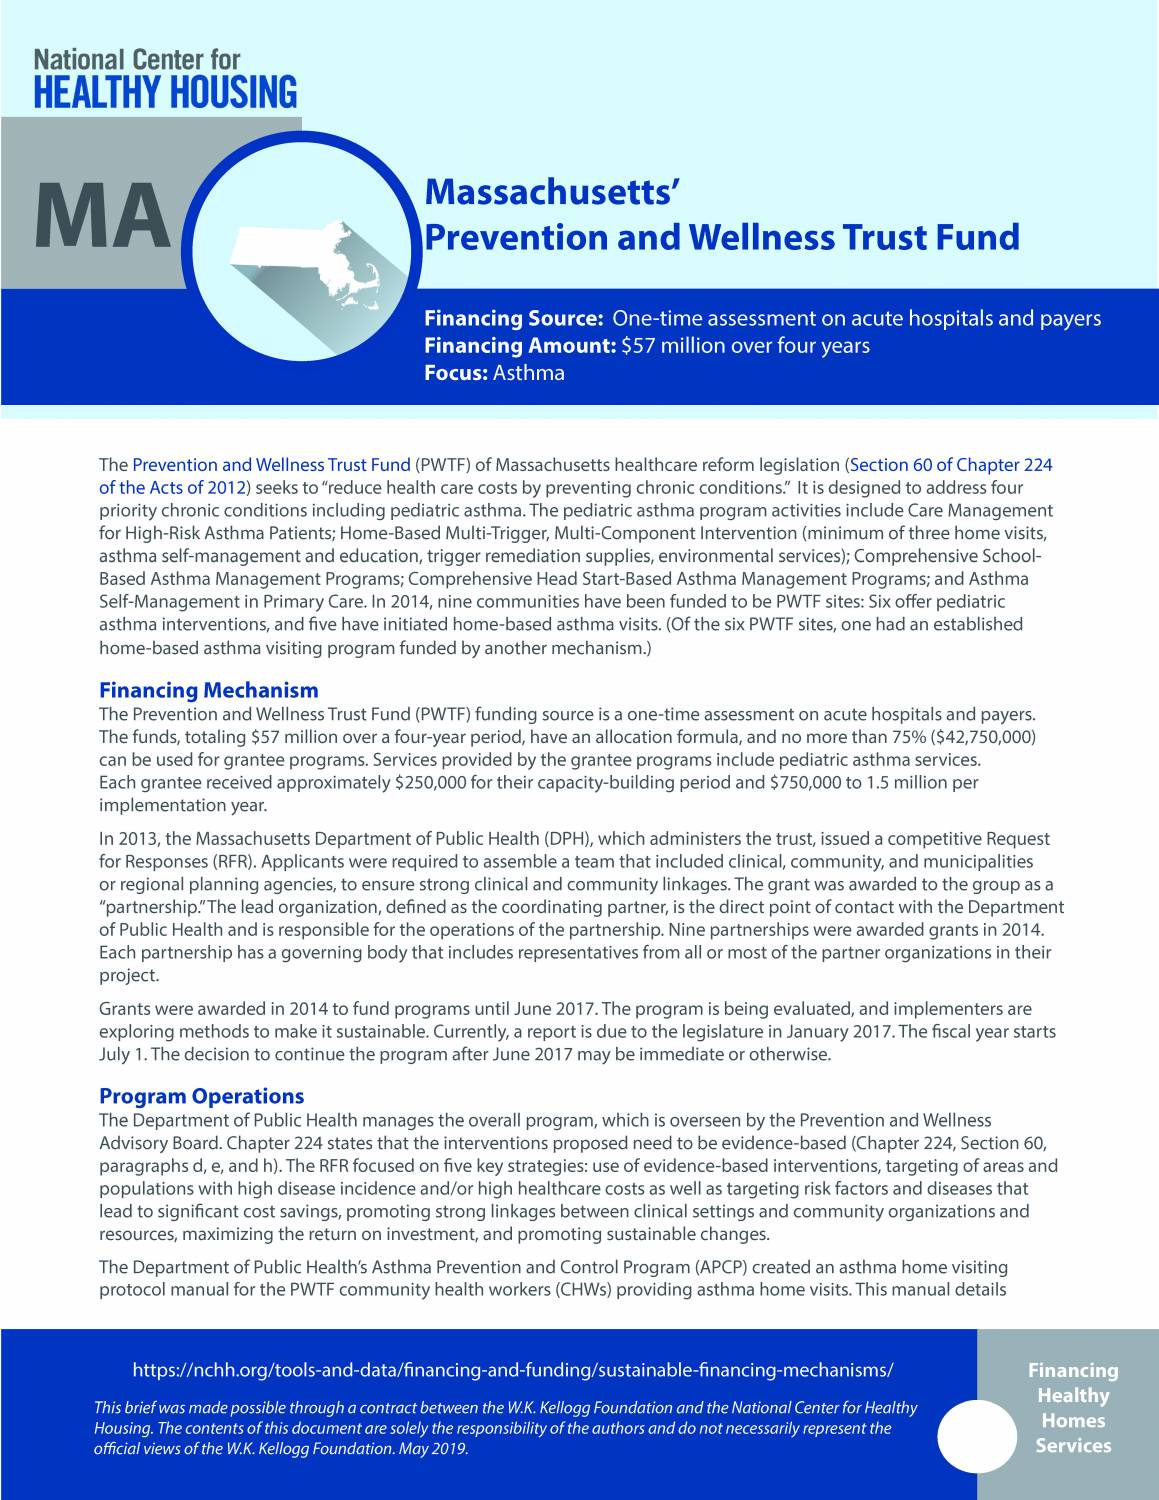 Sustainable Financing Mechanisms – Massachusetts’ Prevention and Wellness Trust Fund